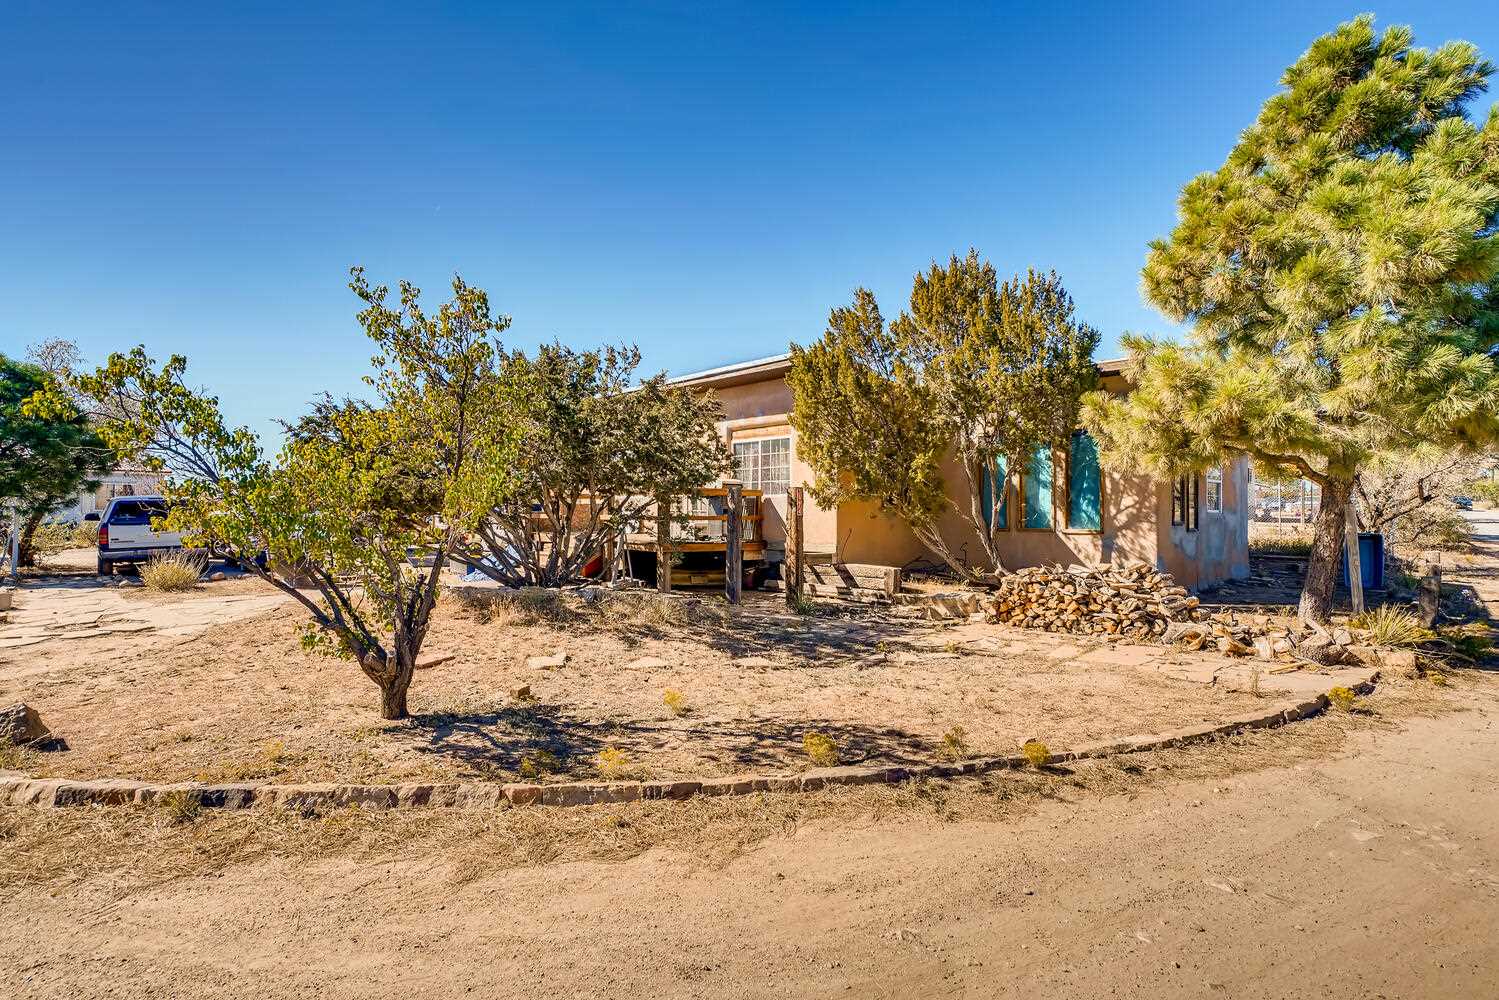 3926 Fields, Santa Fe, New Mexico 87507, 1 Bedroom Bedrooms, ,1 BathroomBathrooms,Residential,For Sale,3926 Fields,202001733